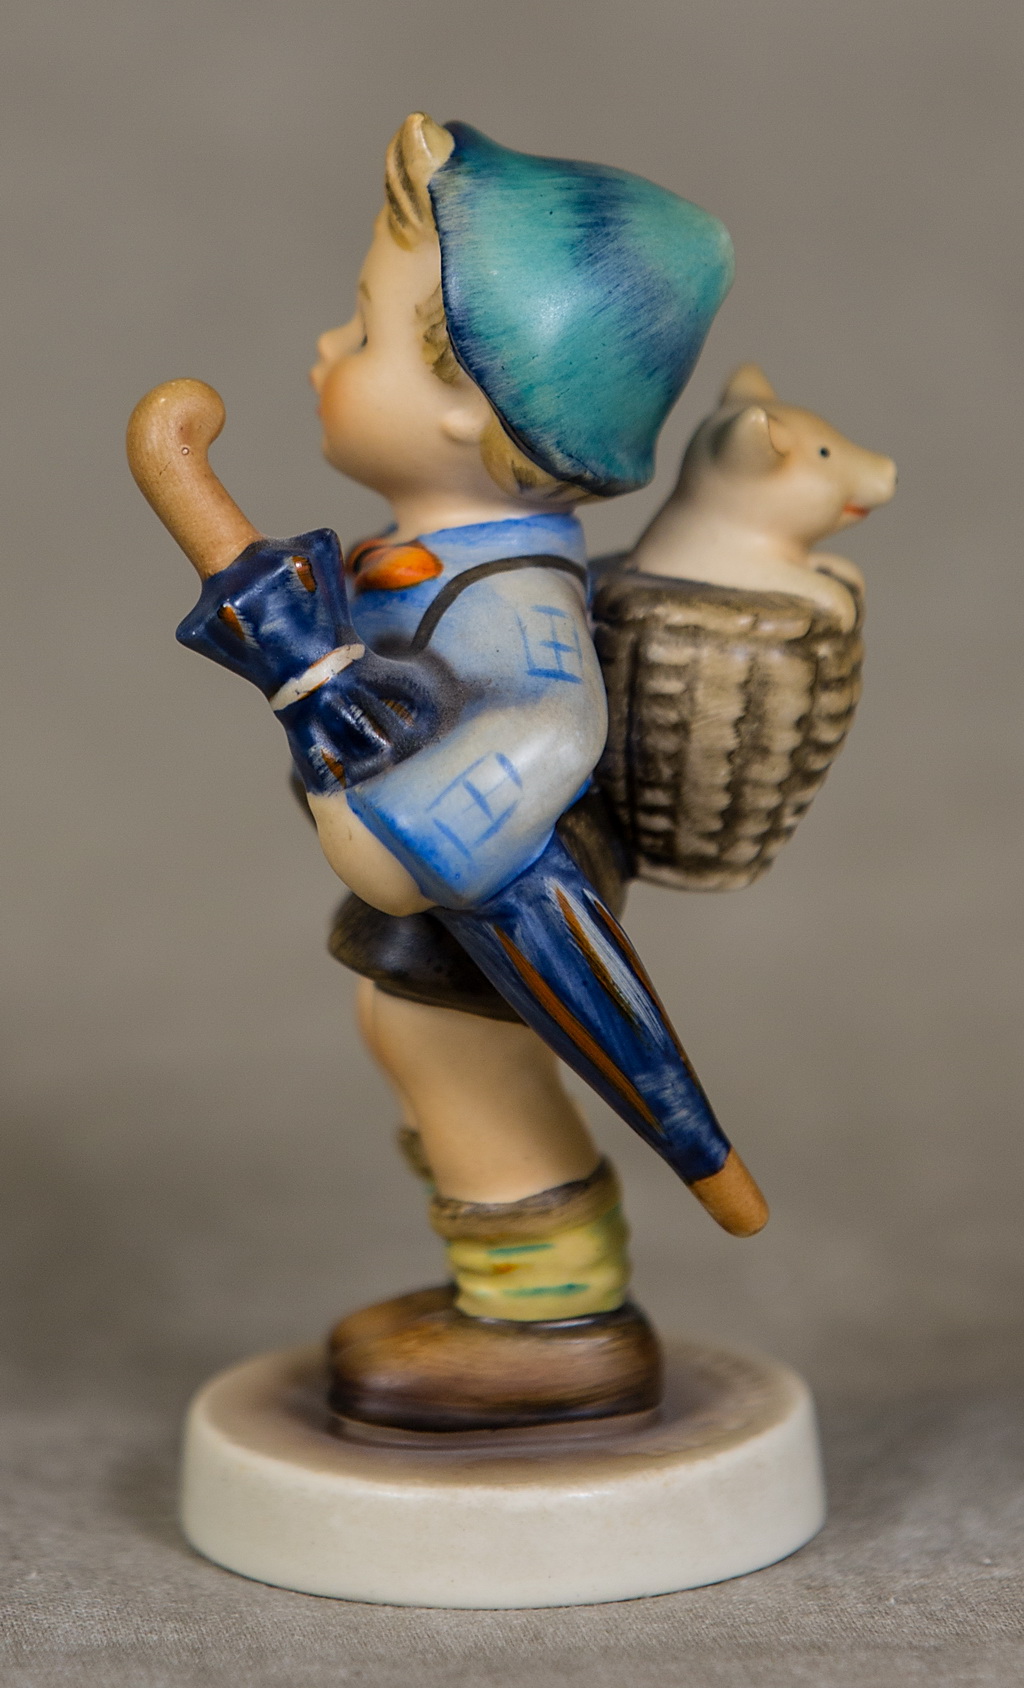 How much is HOME FROM MARKET 4-1/2 inch Figurine (Hummel 198 2/0, TMK 4 ...